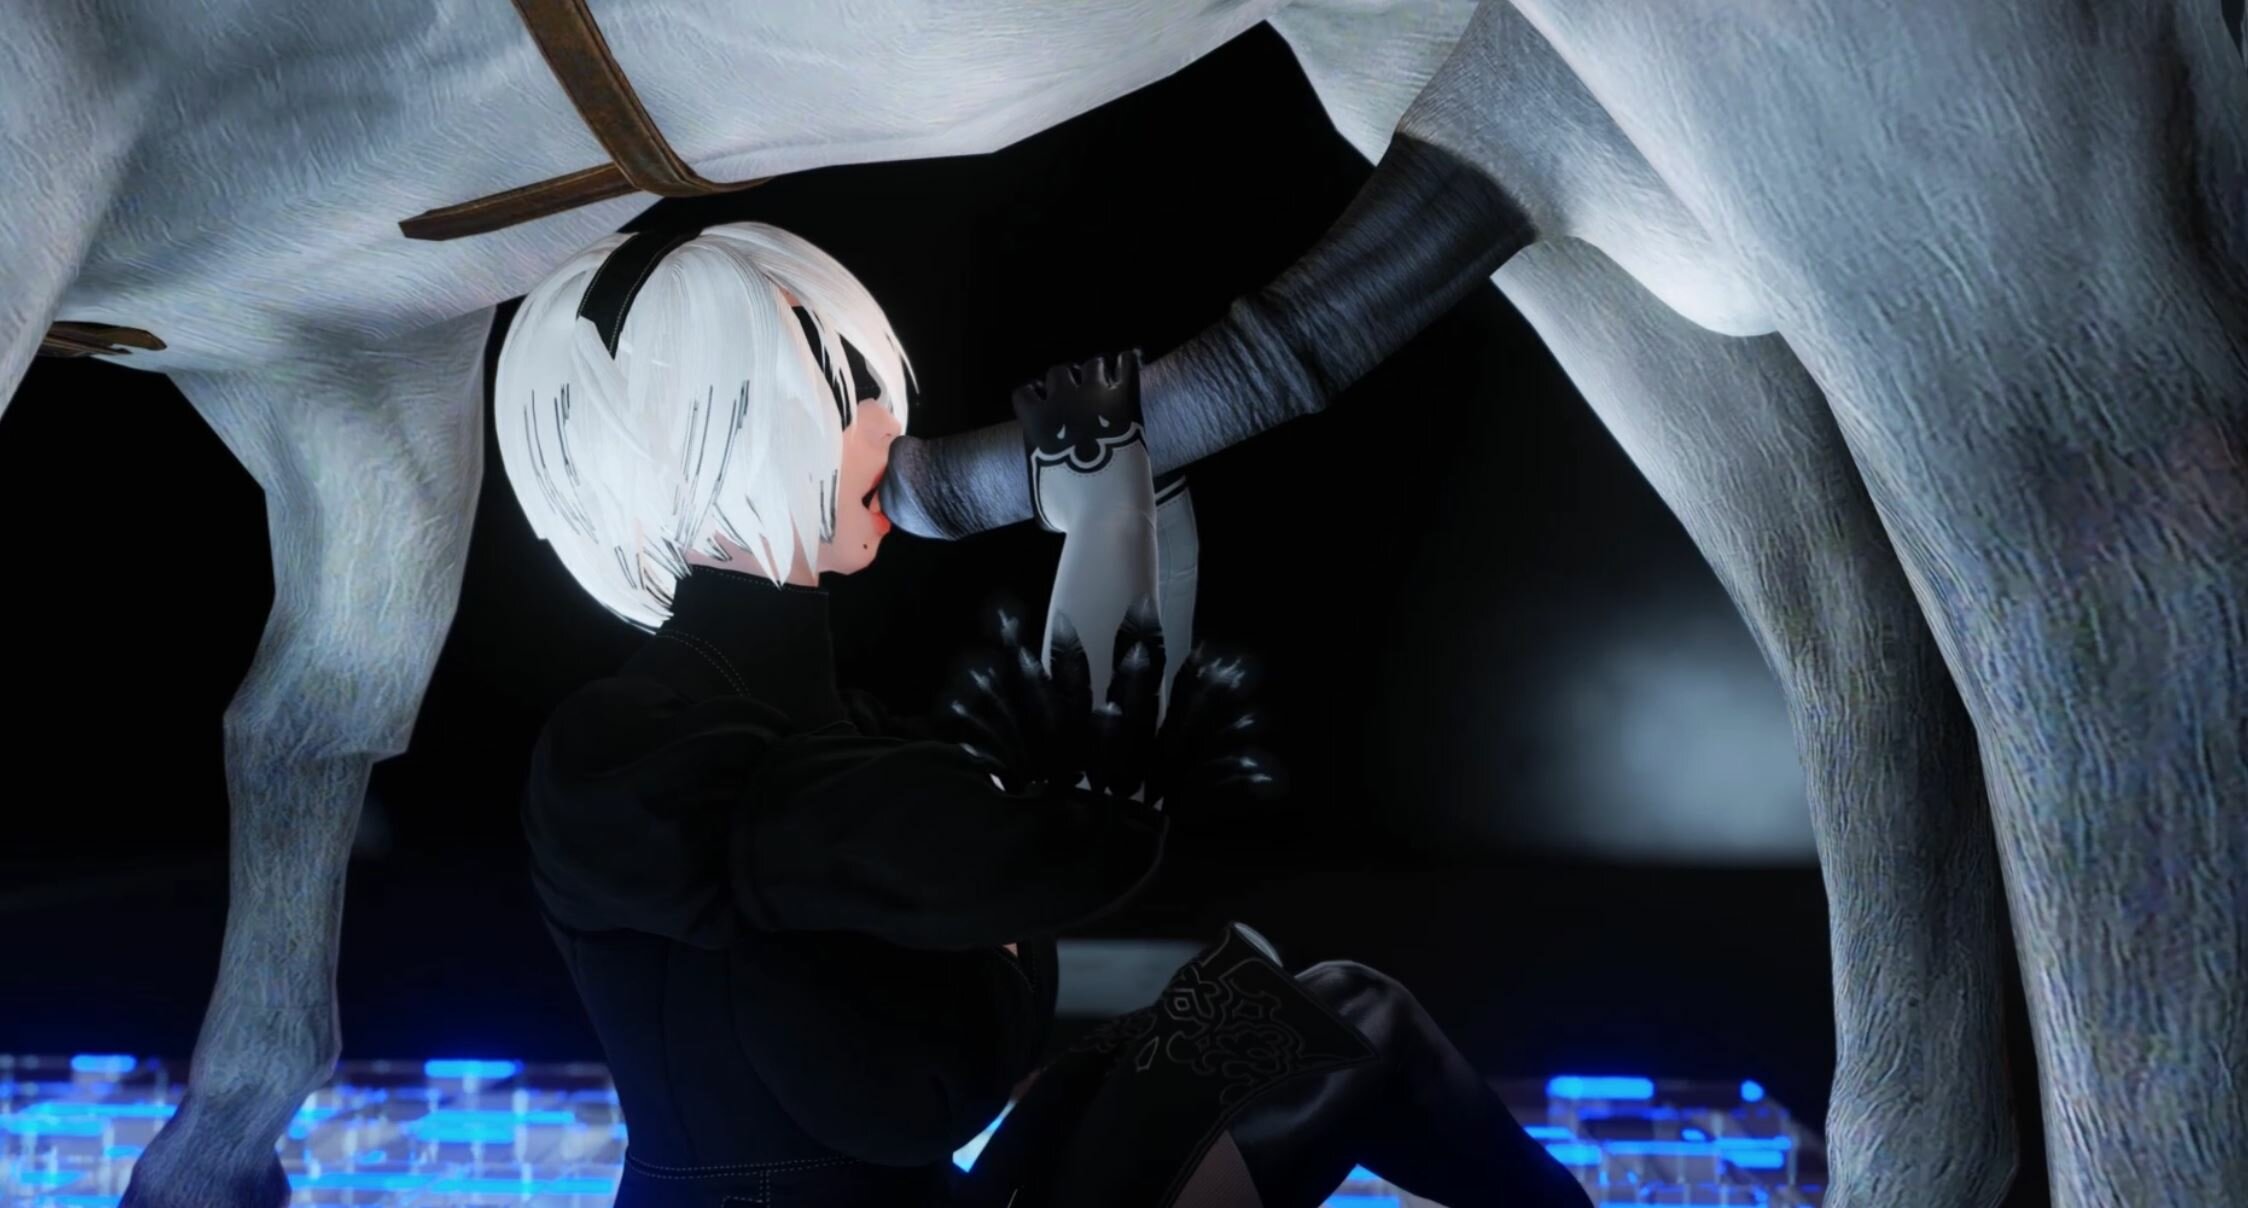 2b and the horse bartender